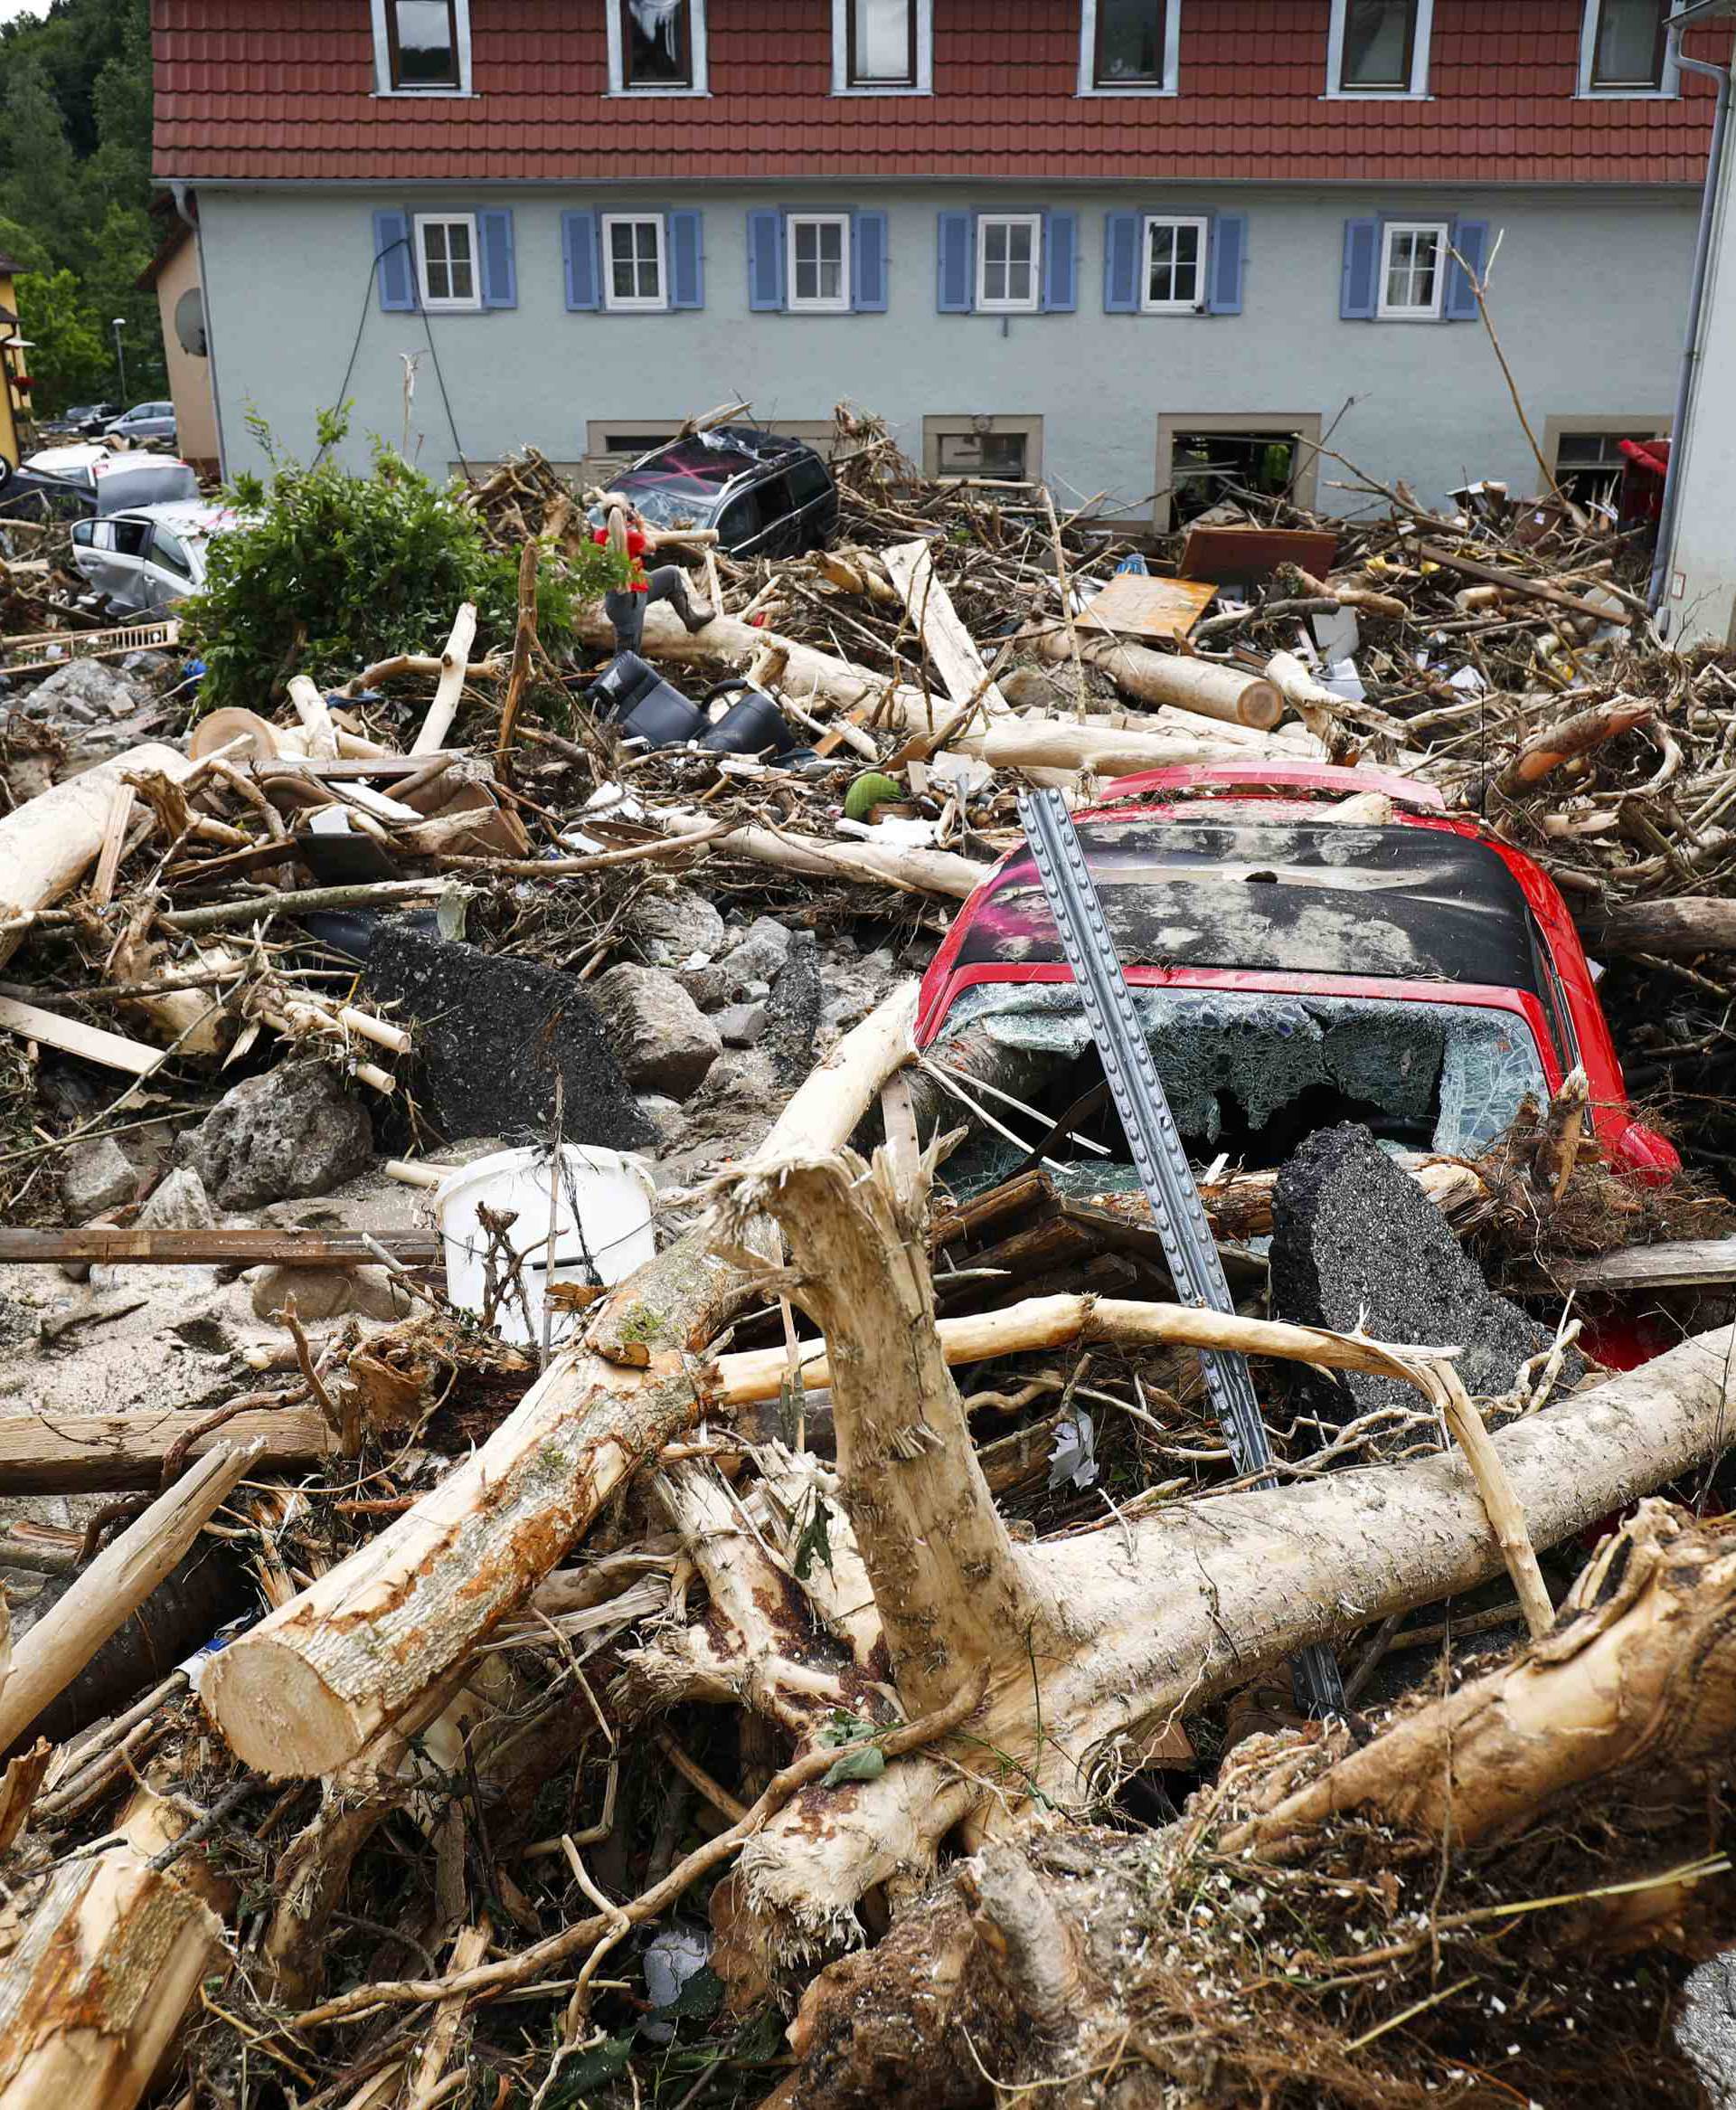 Damaged cars are pictured amid debris after floods in the town of Braunsbach